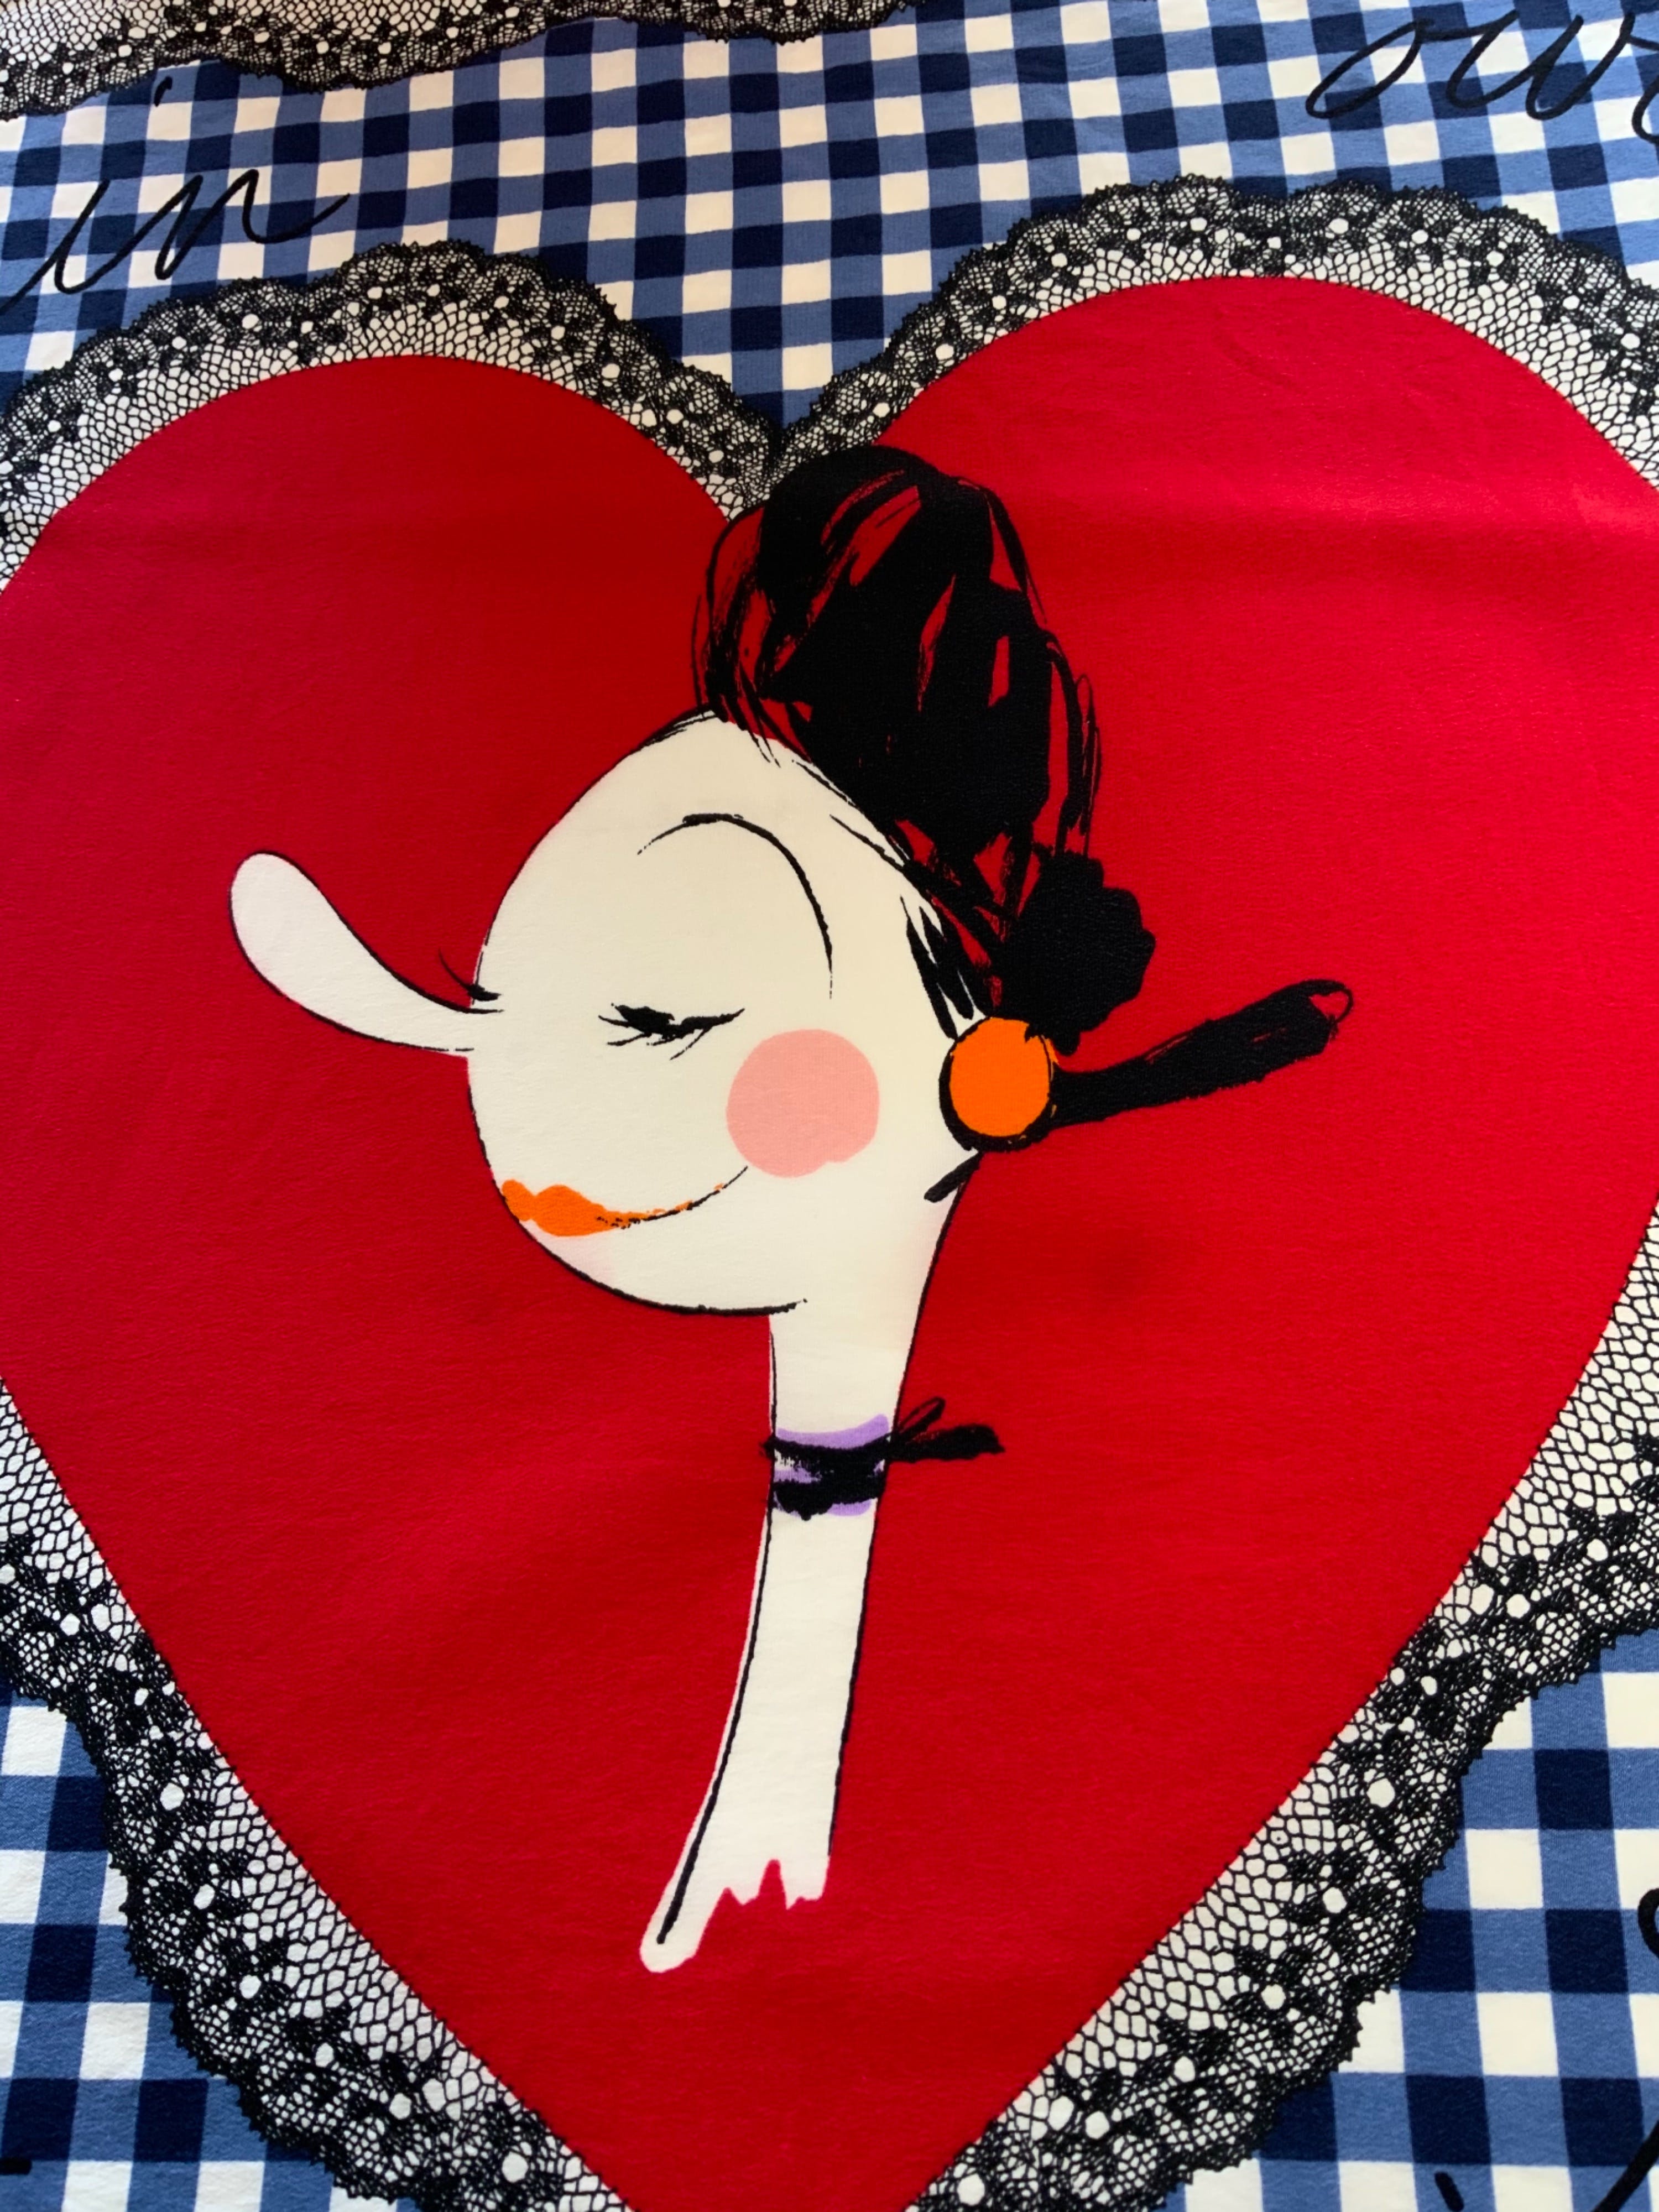 MOSCHINO SILK SCARF - OLIVE OYL APPLIQUE PINK PILLOW SET OF TWO